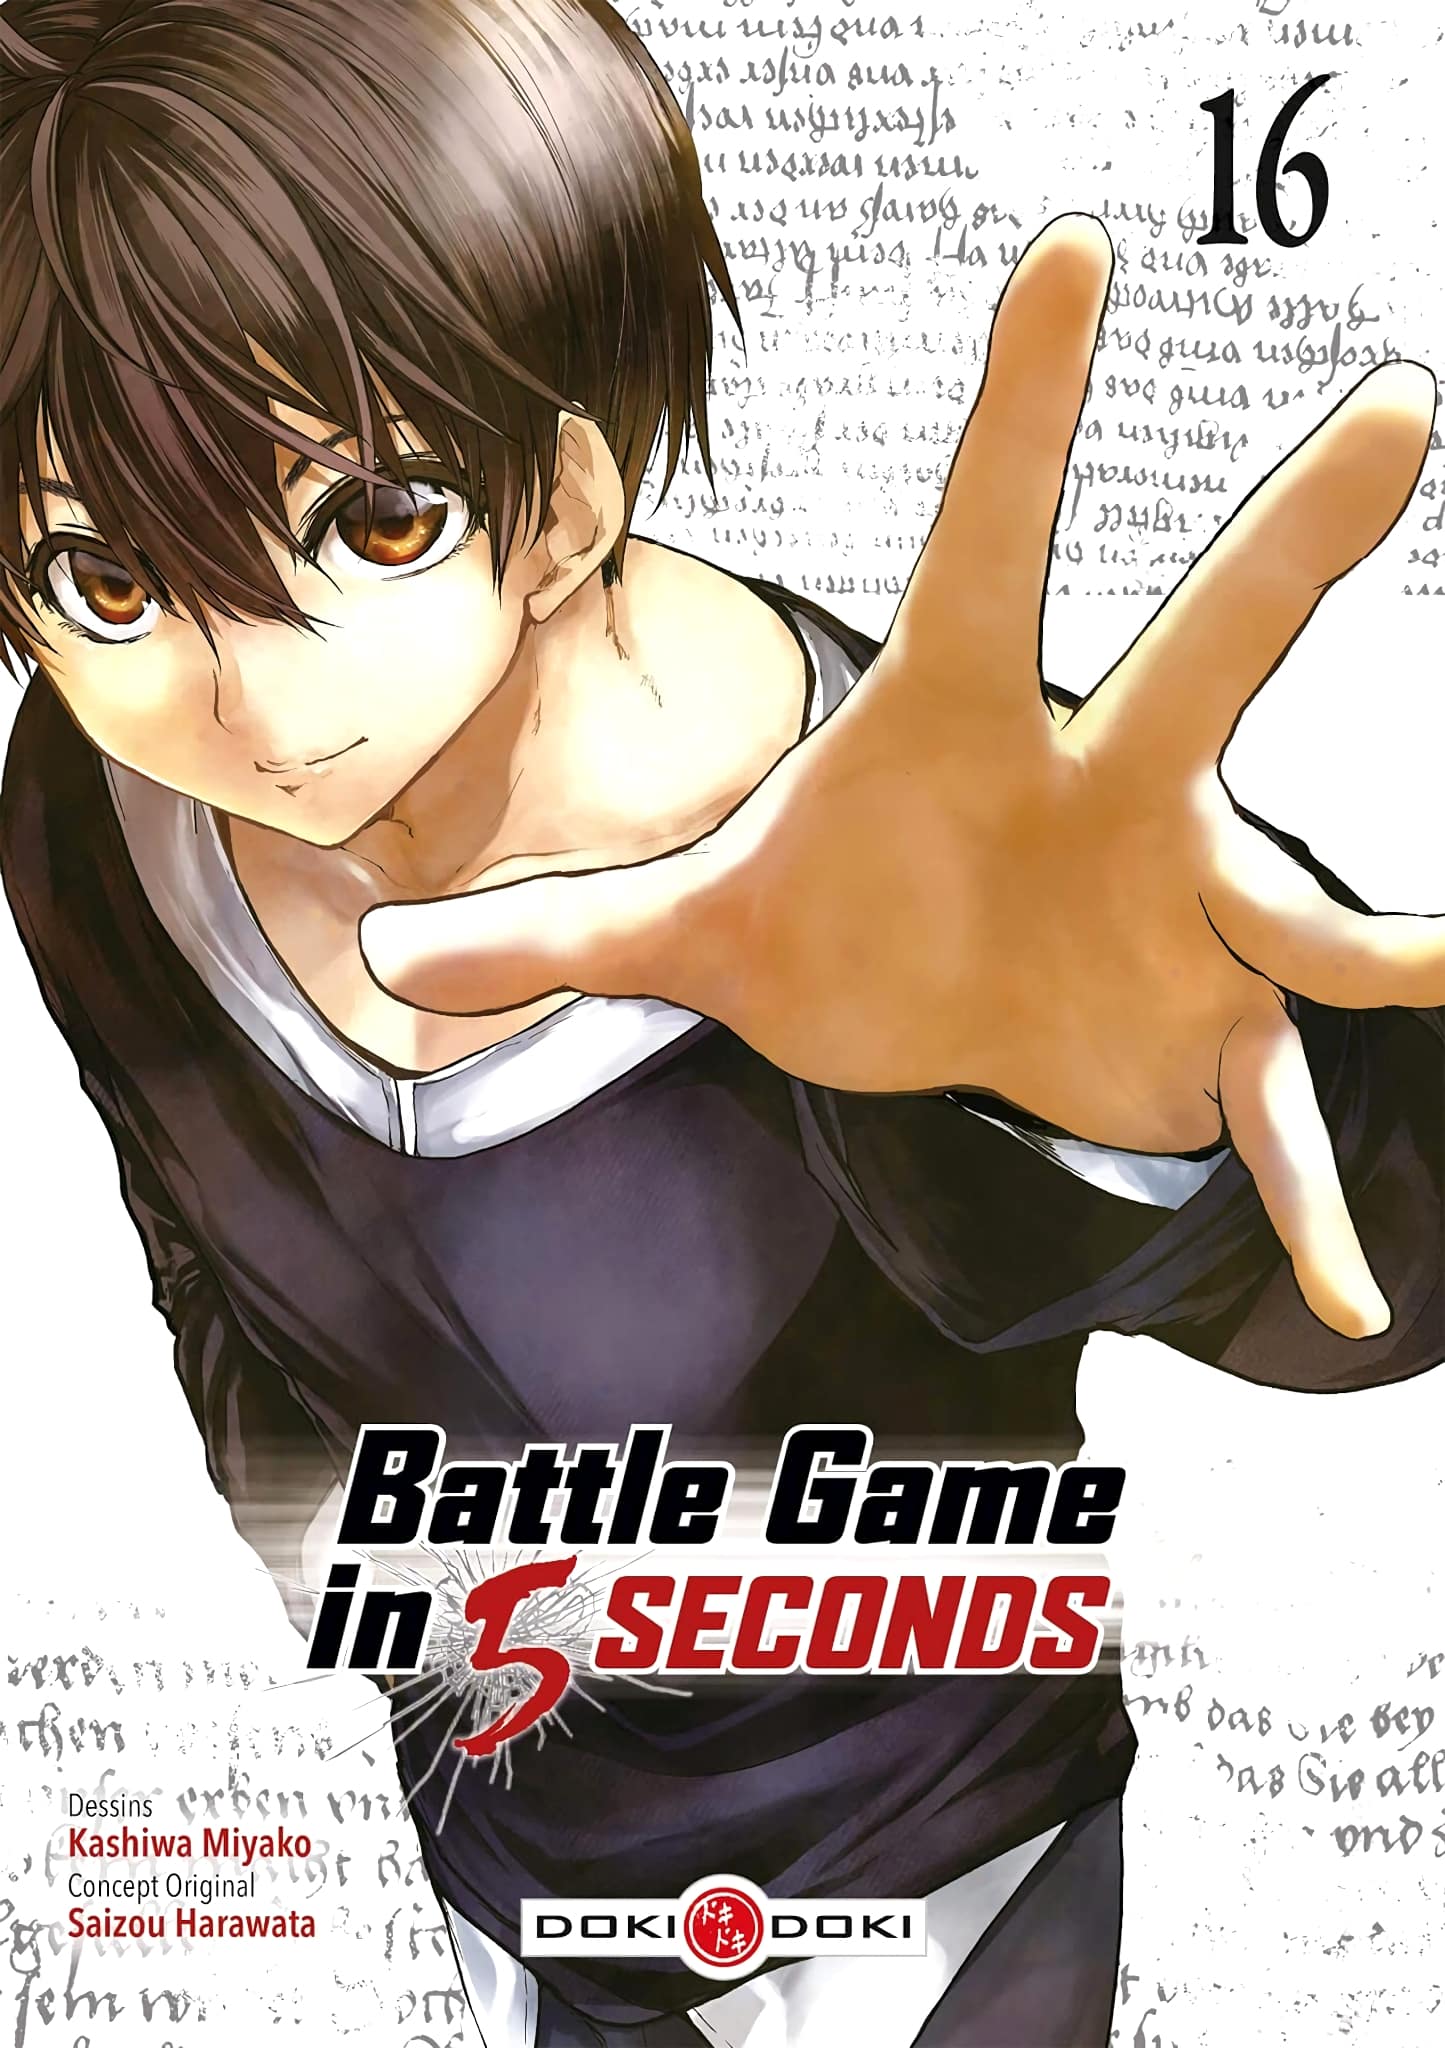 Tome 16 du manga Battle Game in 5 Seconds